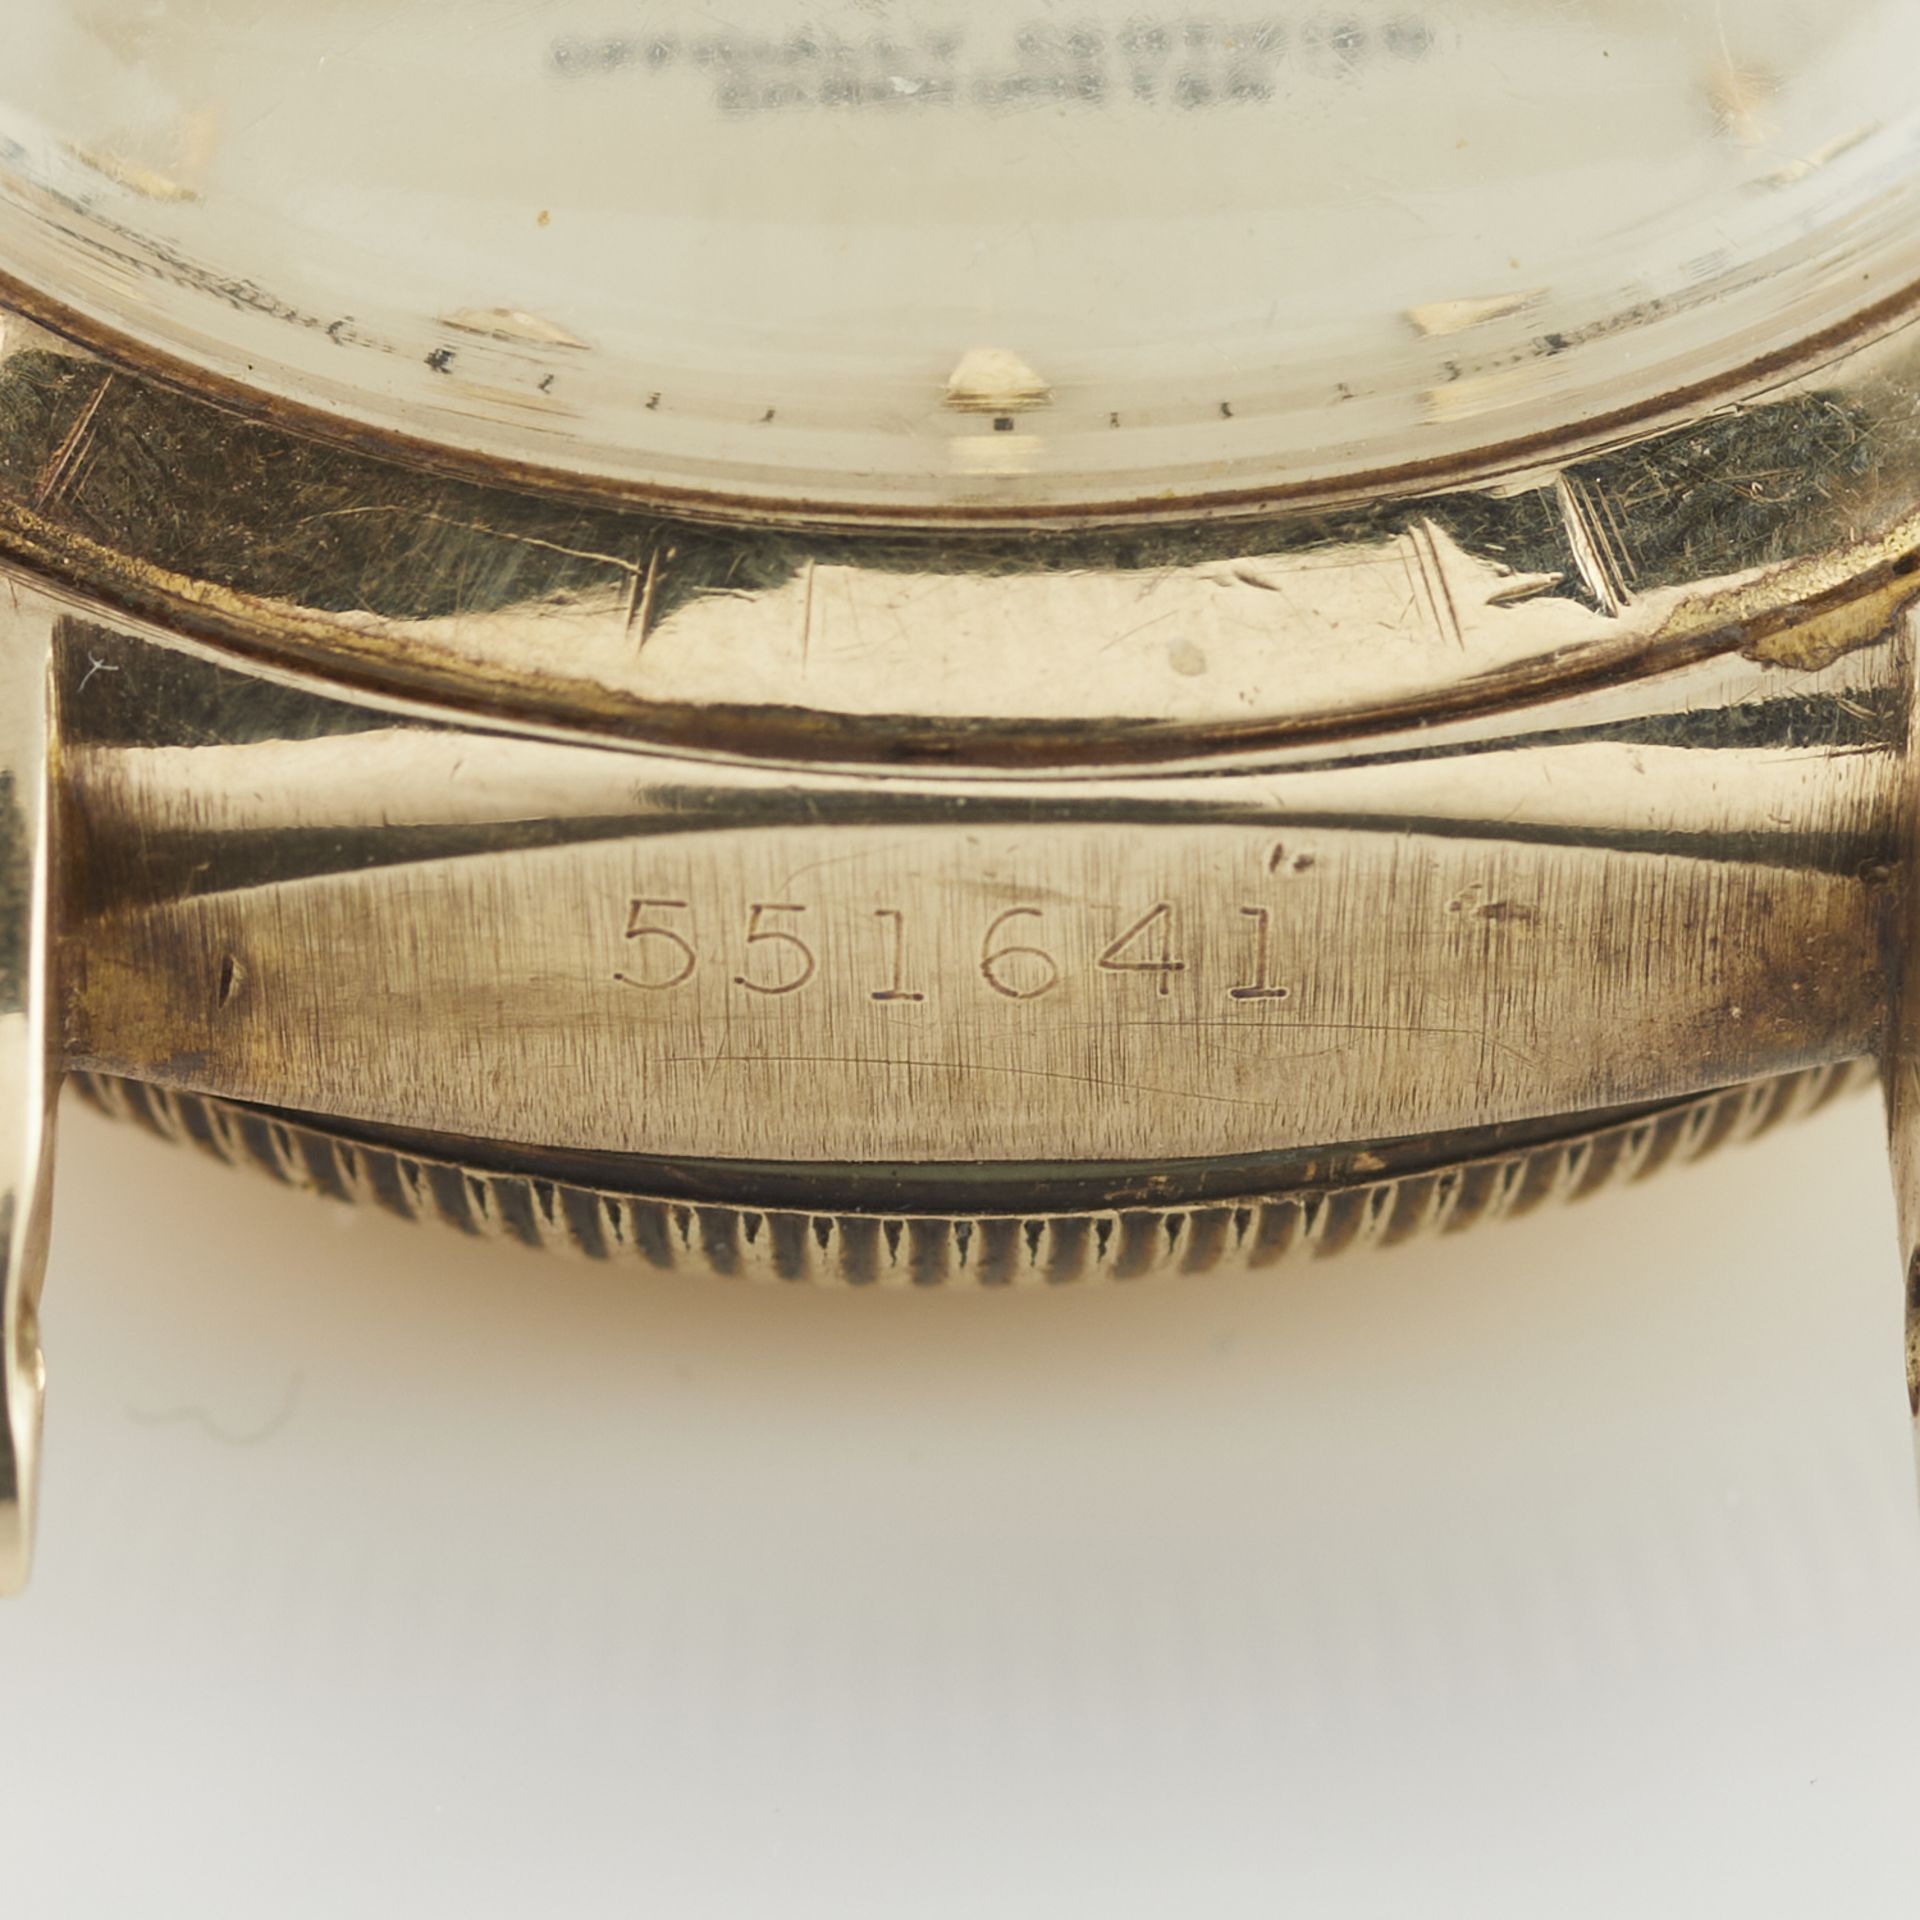 14k Rolex Oyster Perpetual 4777 Bubble Back - Image 8 of 14